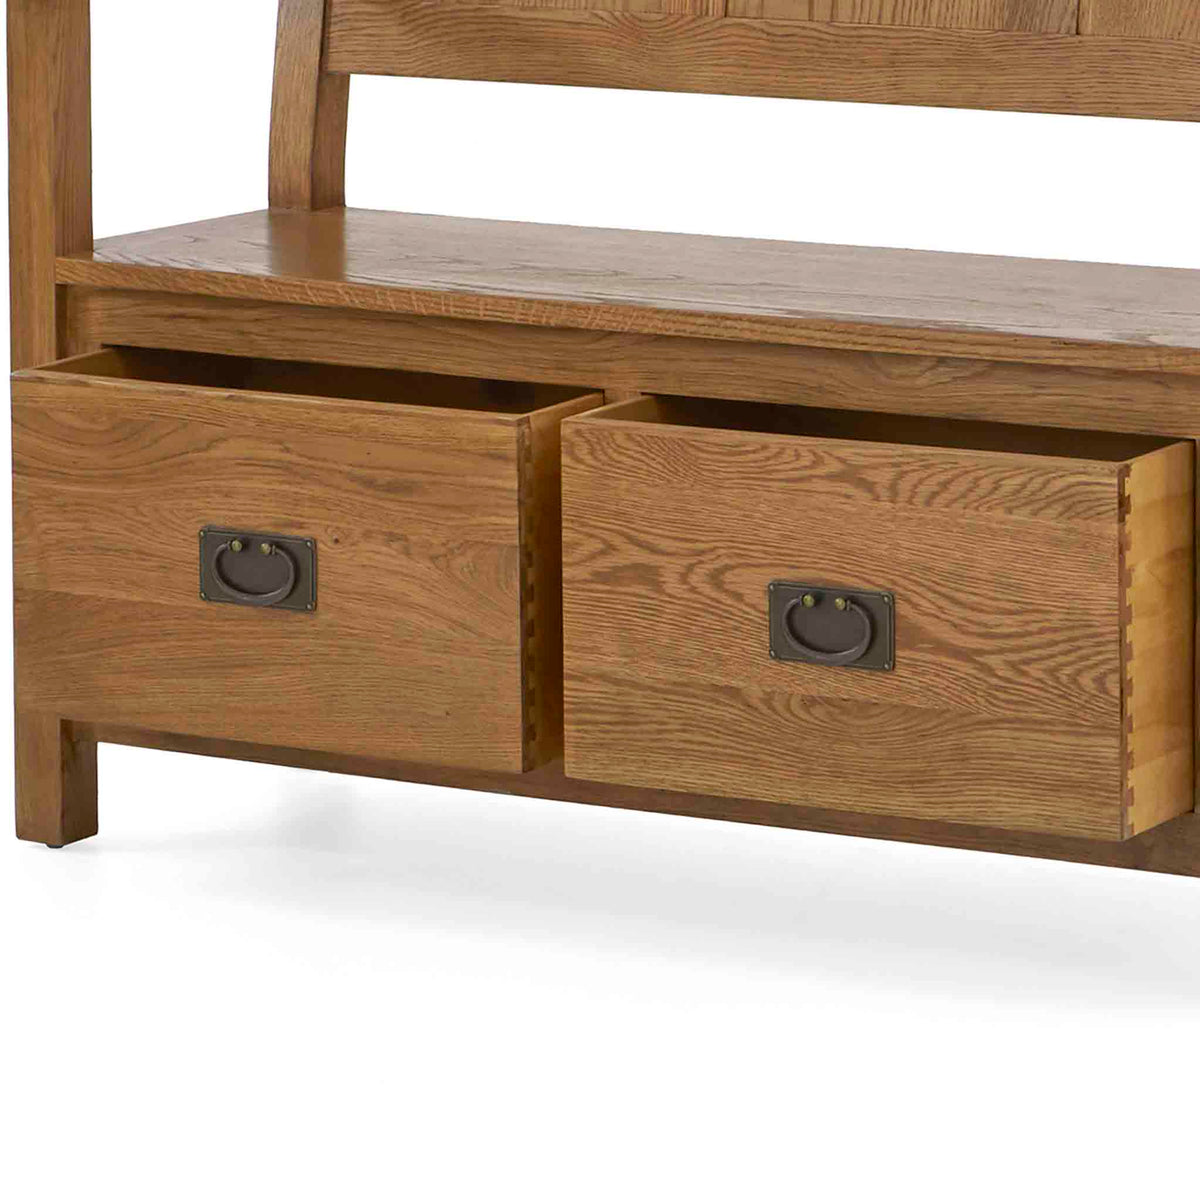 Zelah Oak Monks Bench - Close up of seat and lower drawers